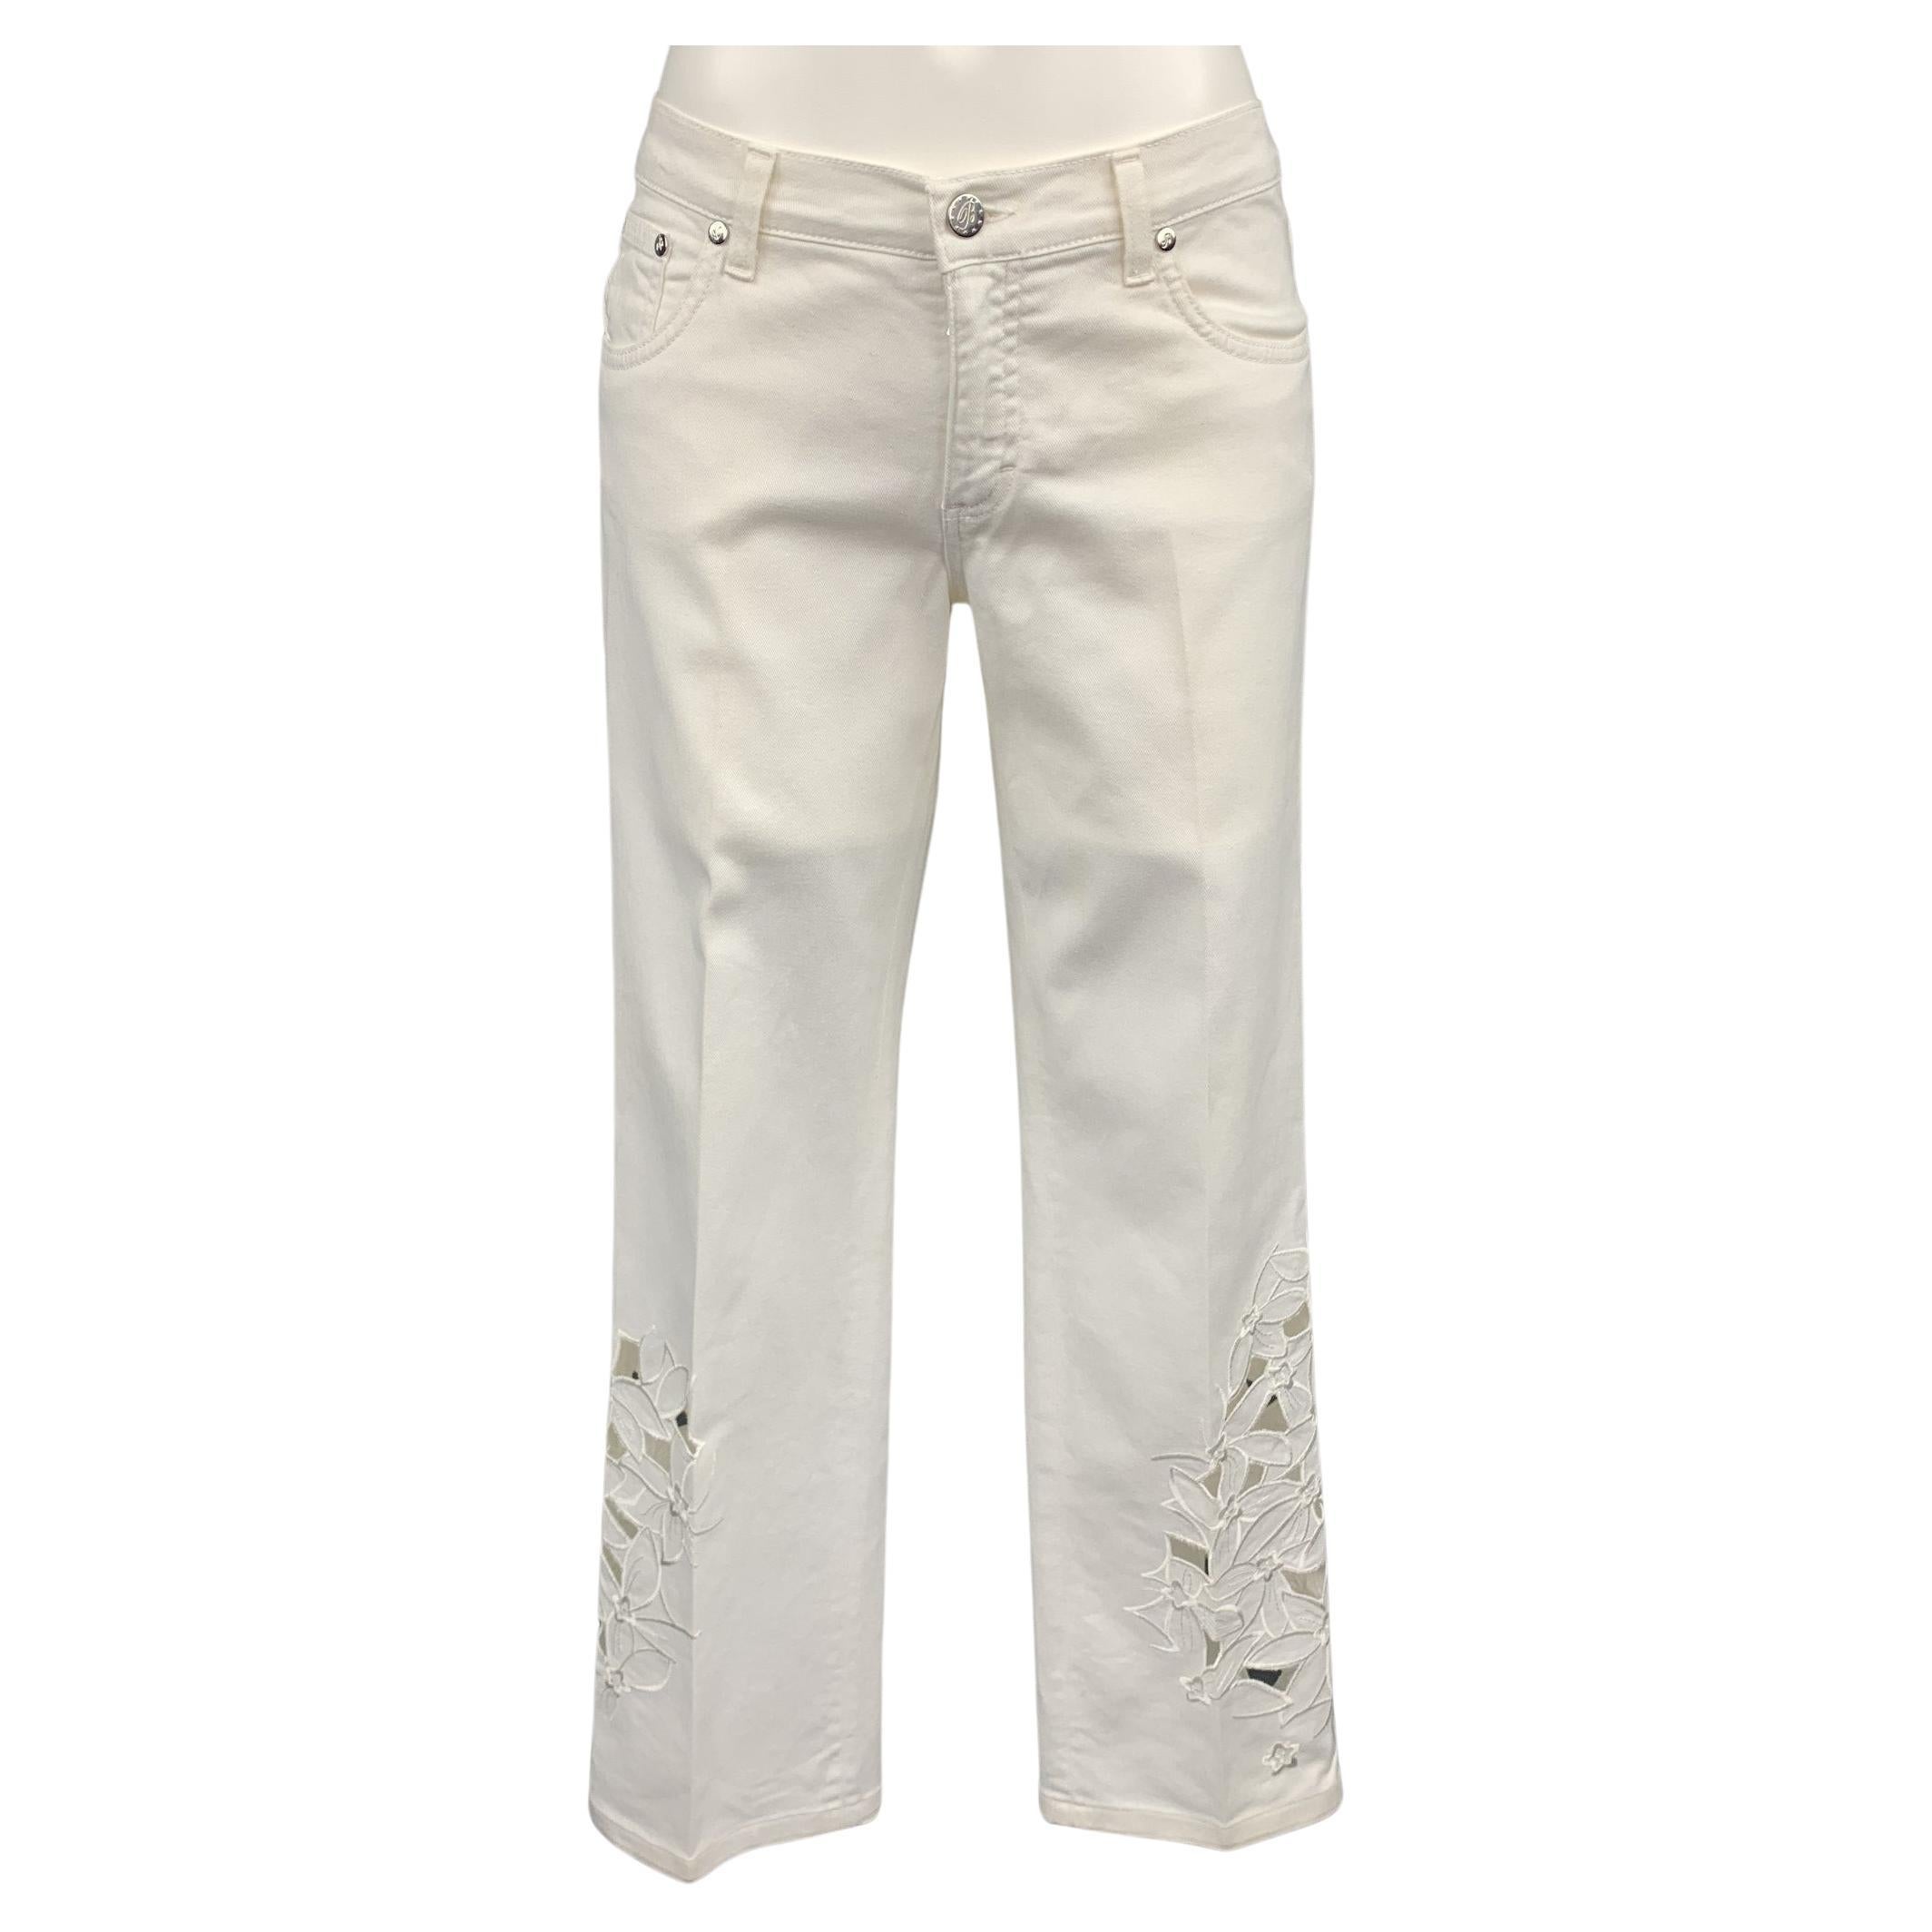 BLUMARINE Size 4 White Denim Embroidered Cut Out Jeans